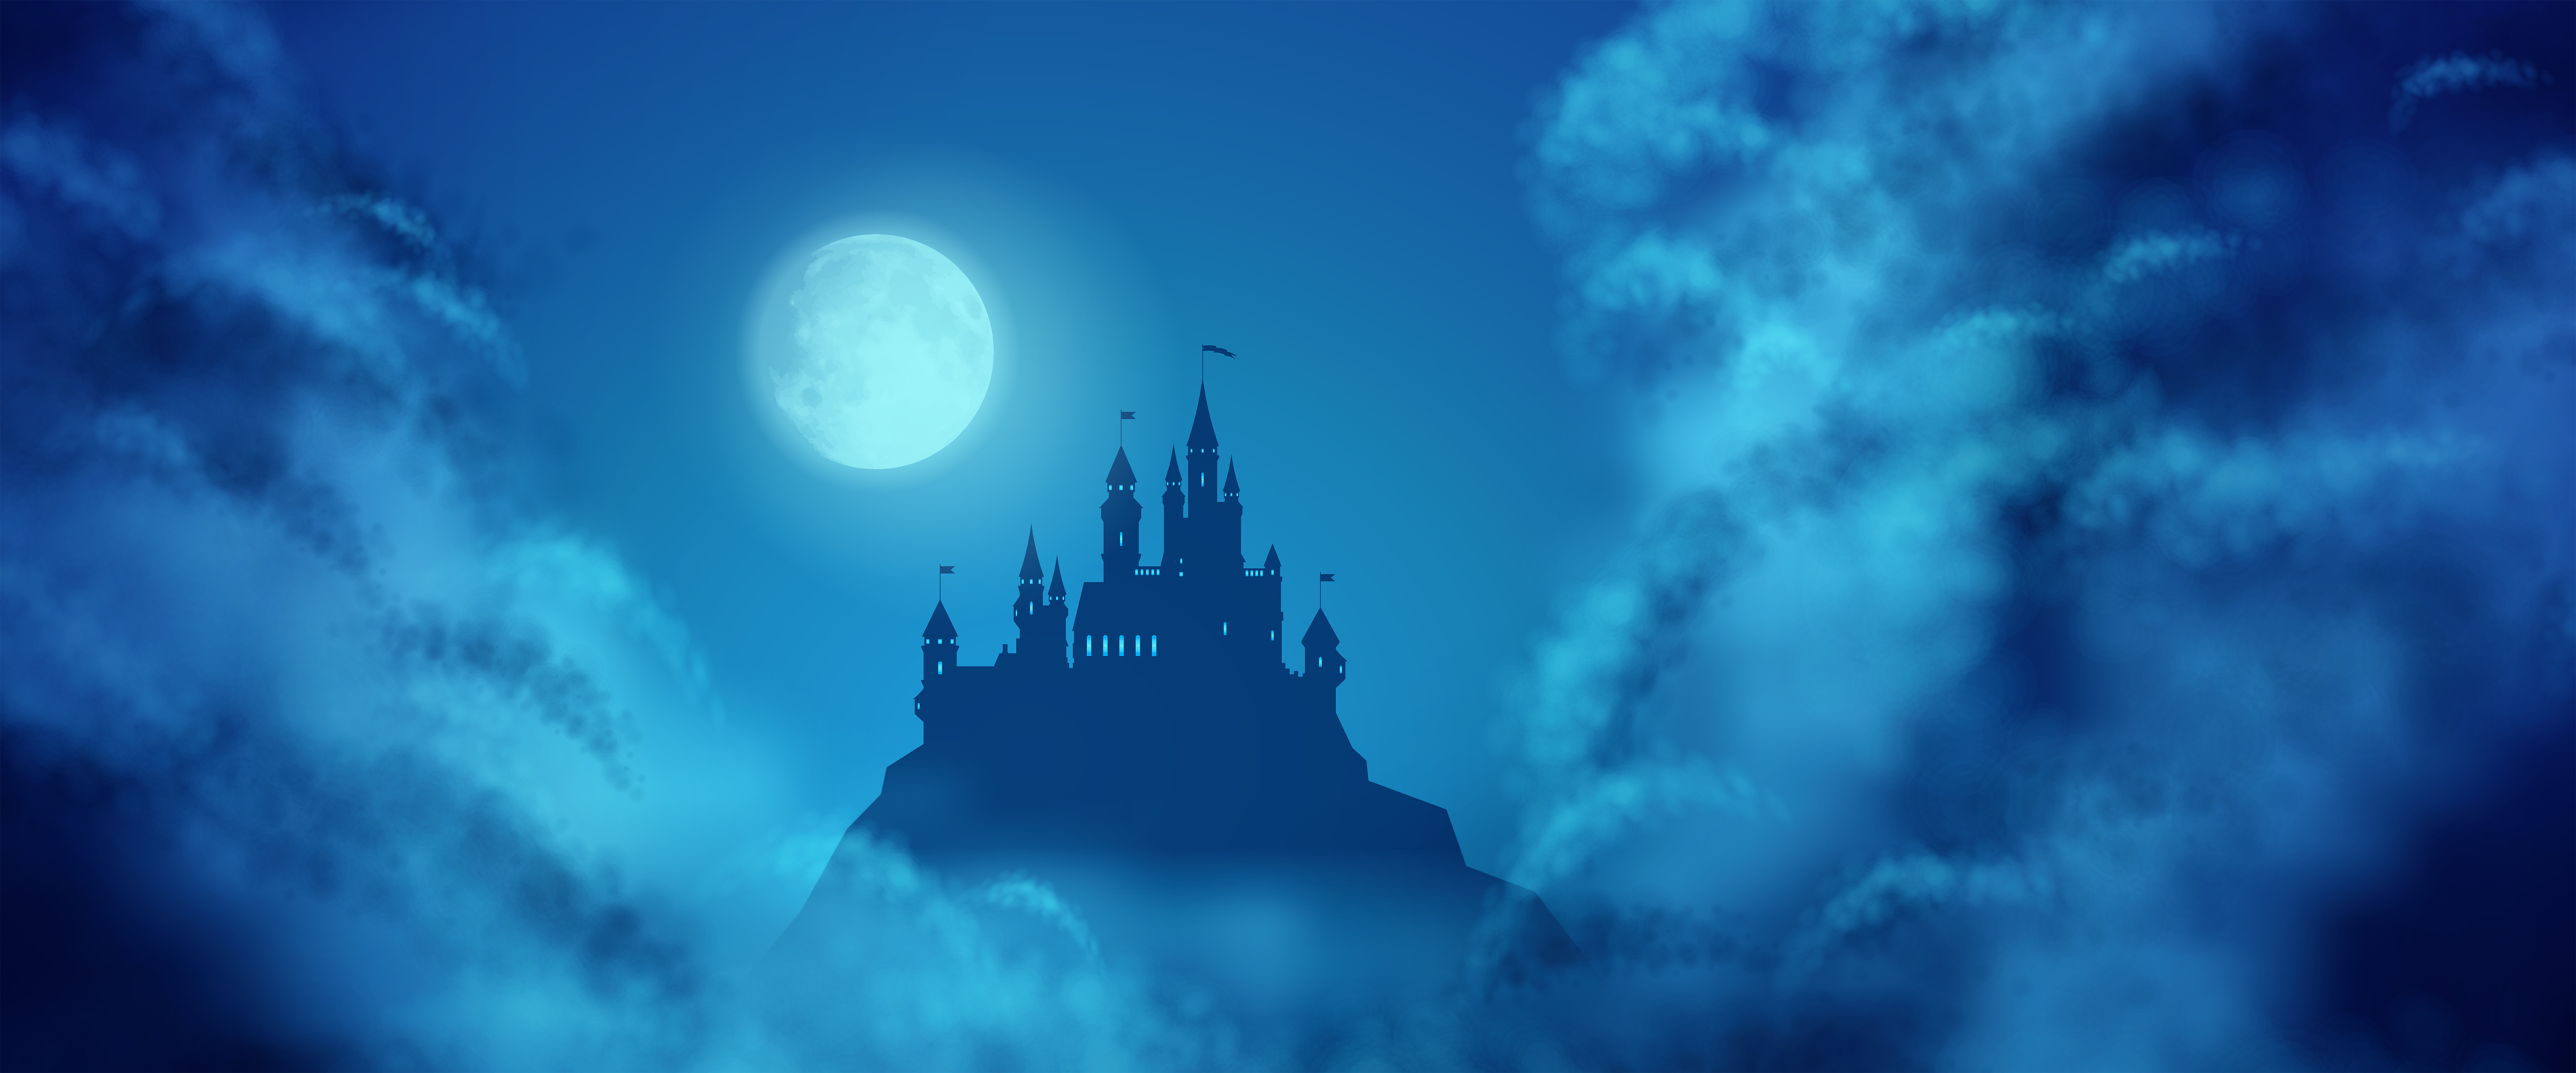 Castle vector image with clouds and moon